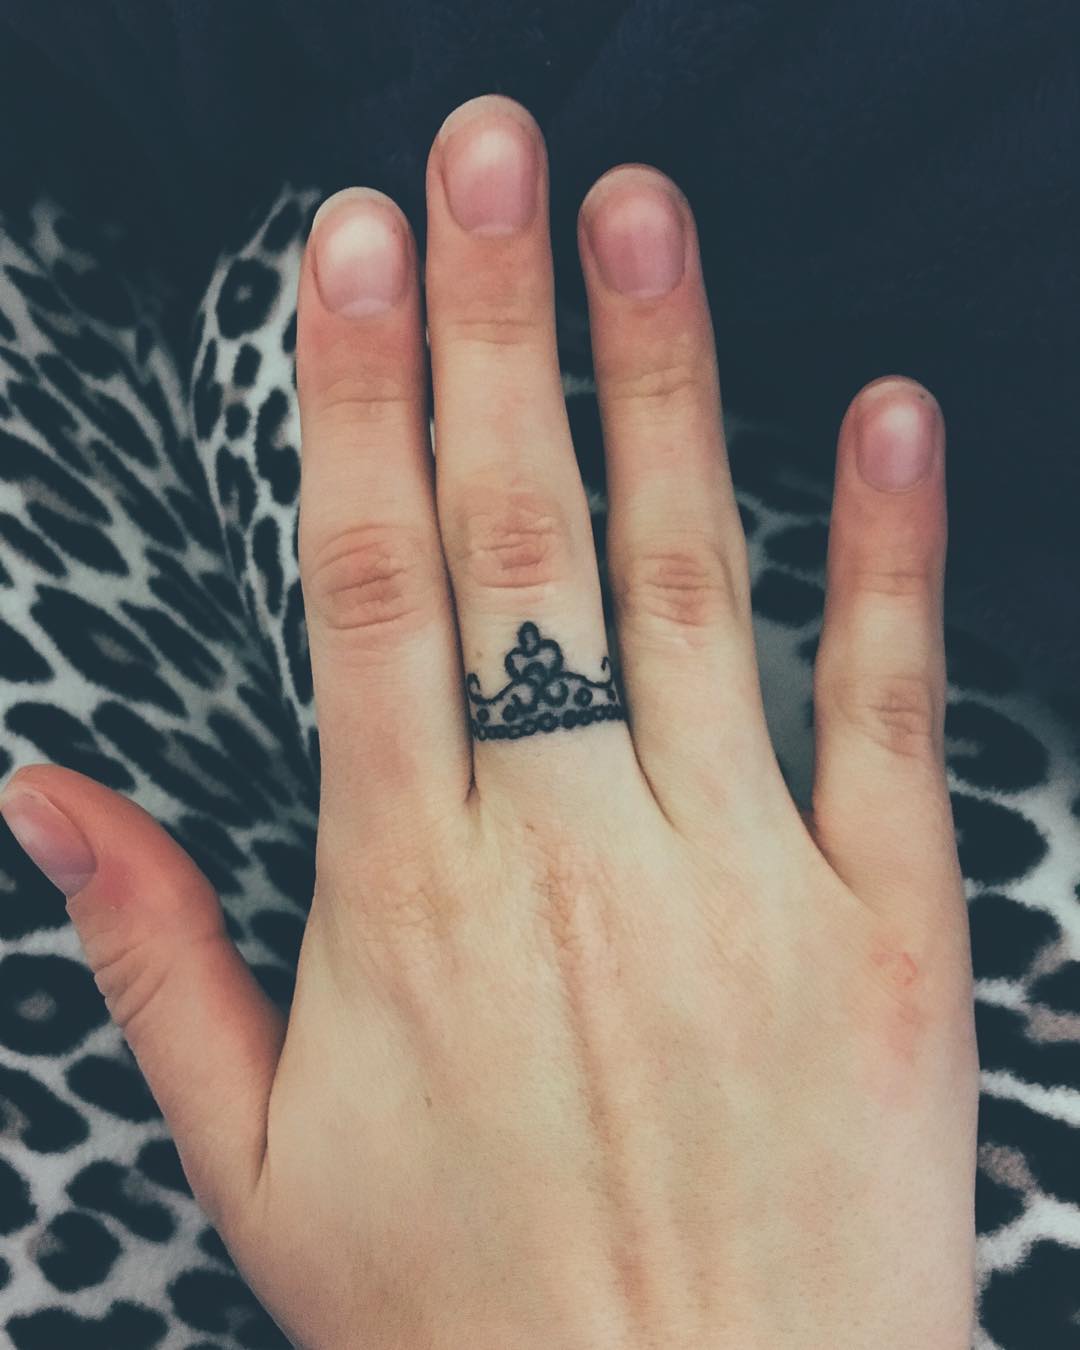 Small Ring Tattoo - Small Meaningful Tattoos - Meaningful Tattoos - Crayon